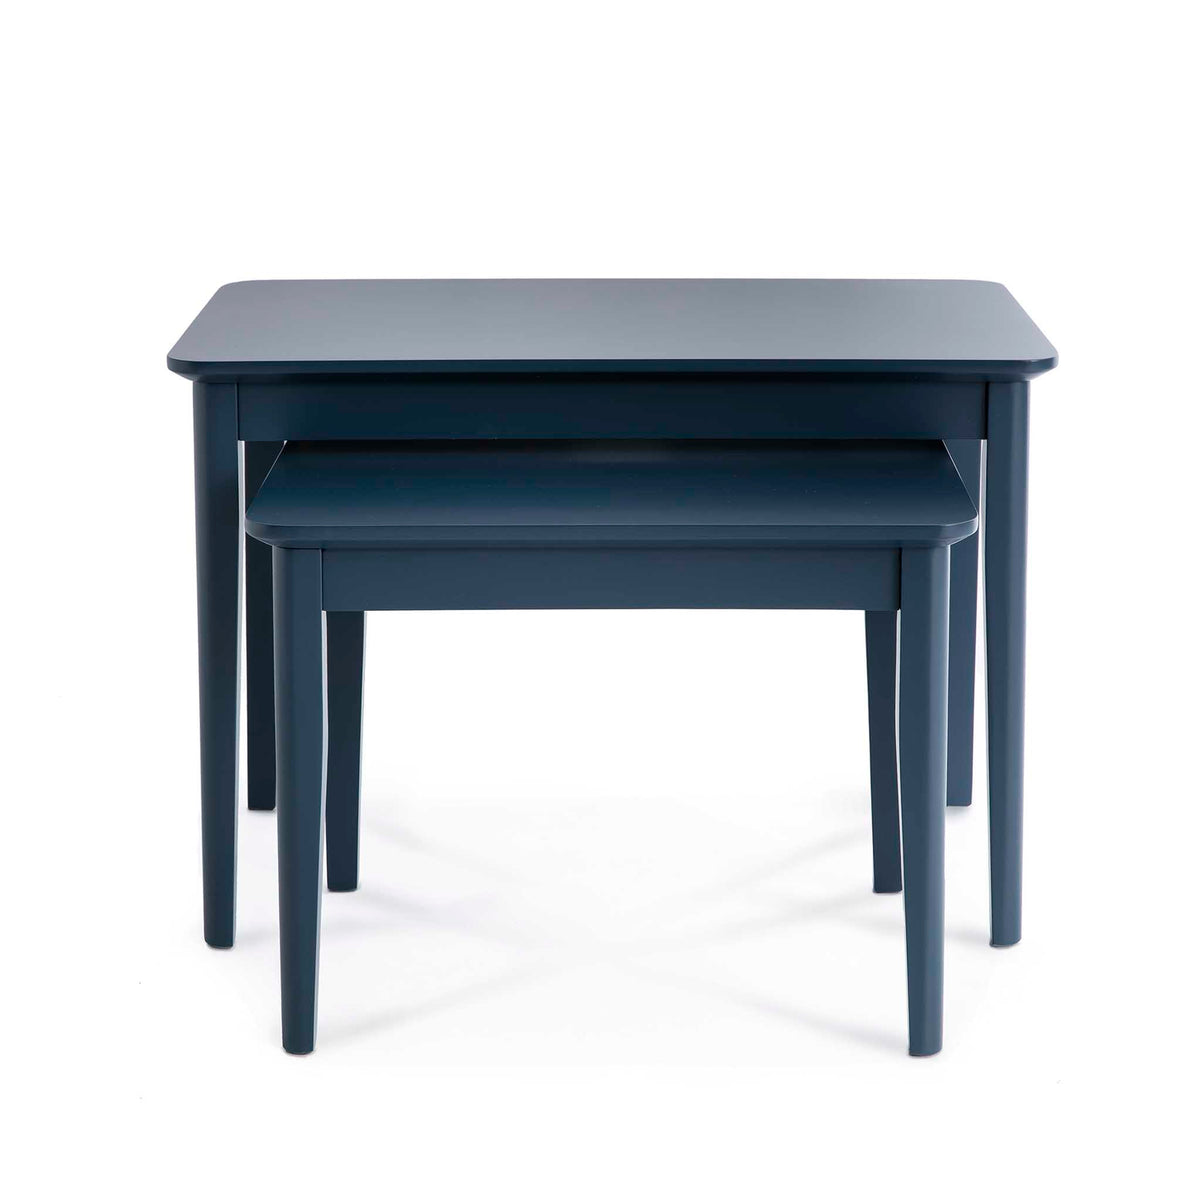 Stirling Blue Nest of Tables - Front view with smaller table pulled out